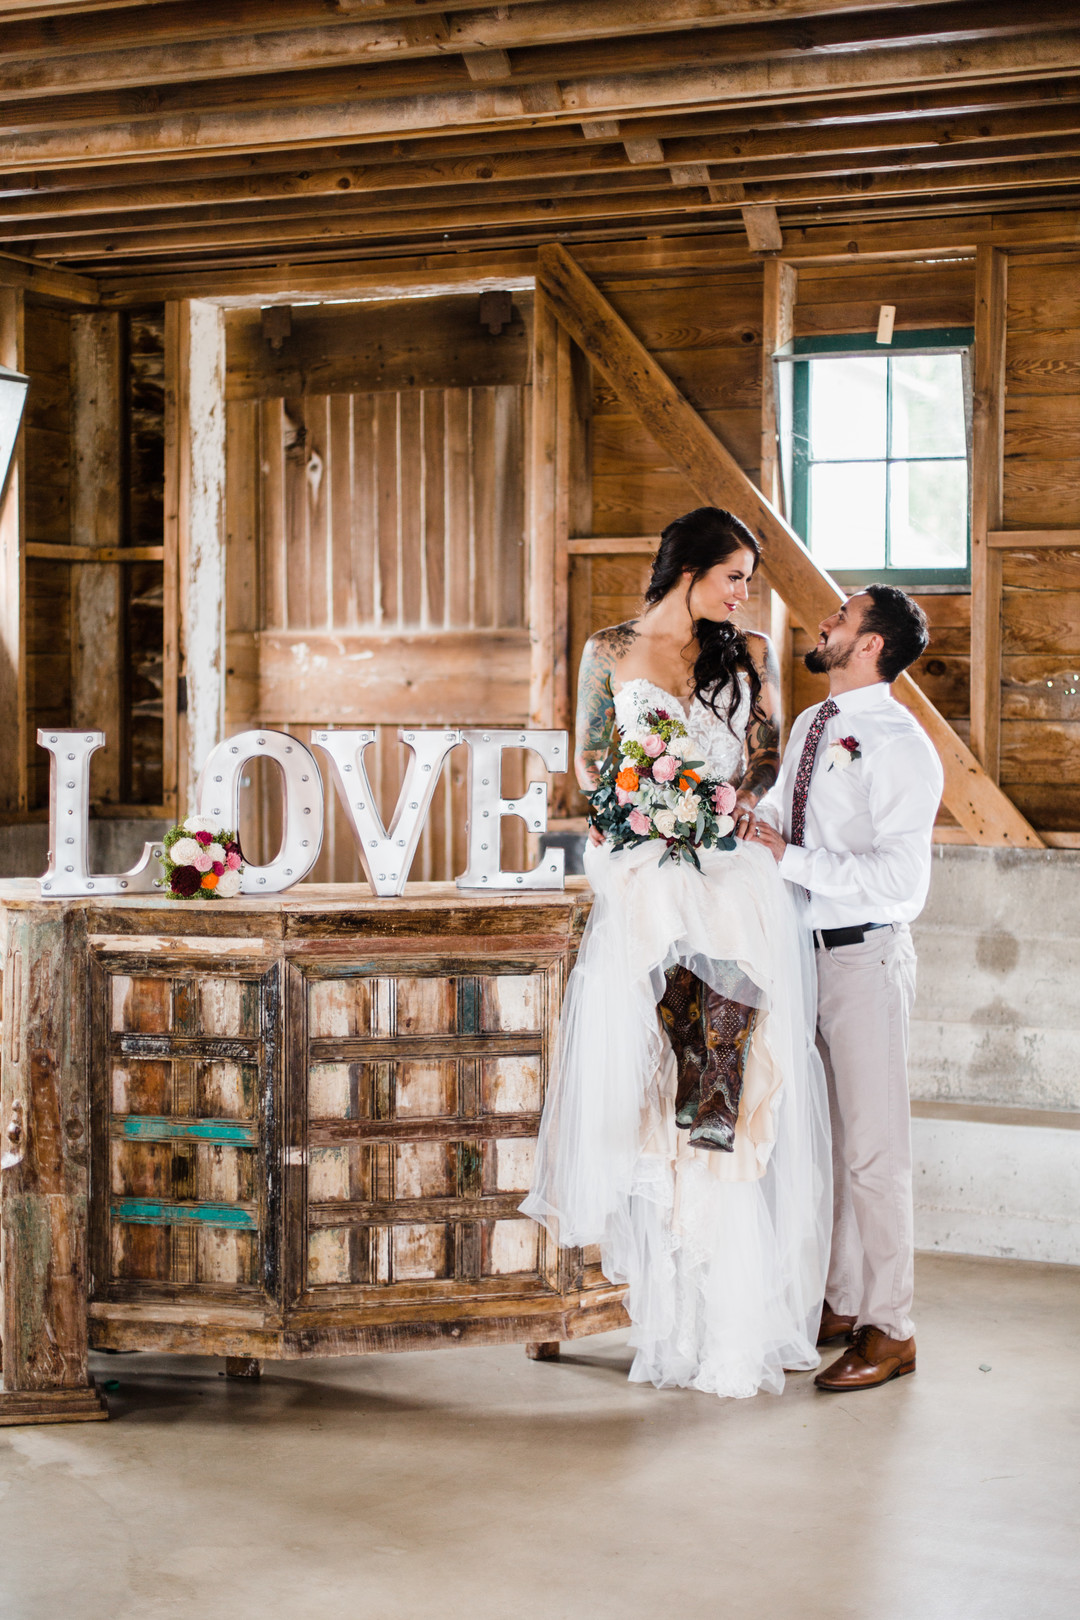 Rustic barn wedding inspiration captured by Grace Rios Photography. See more fall wedding ideas at CHItheeWED.com!